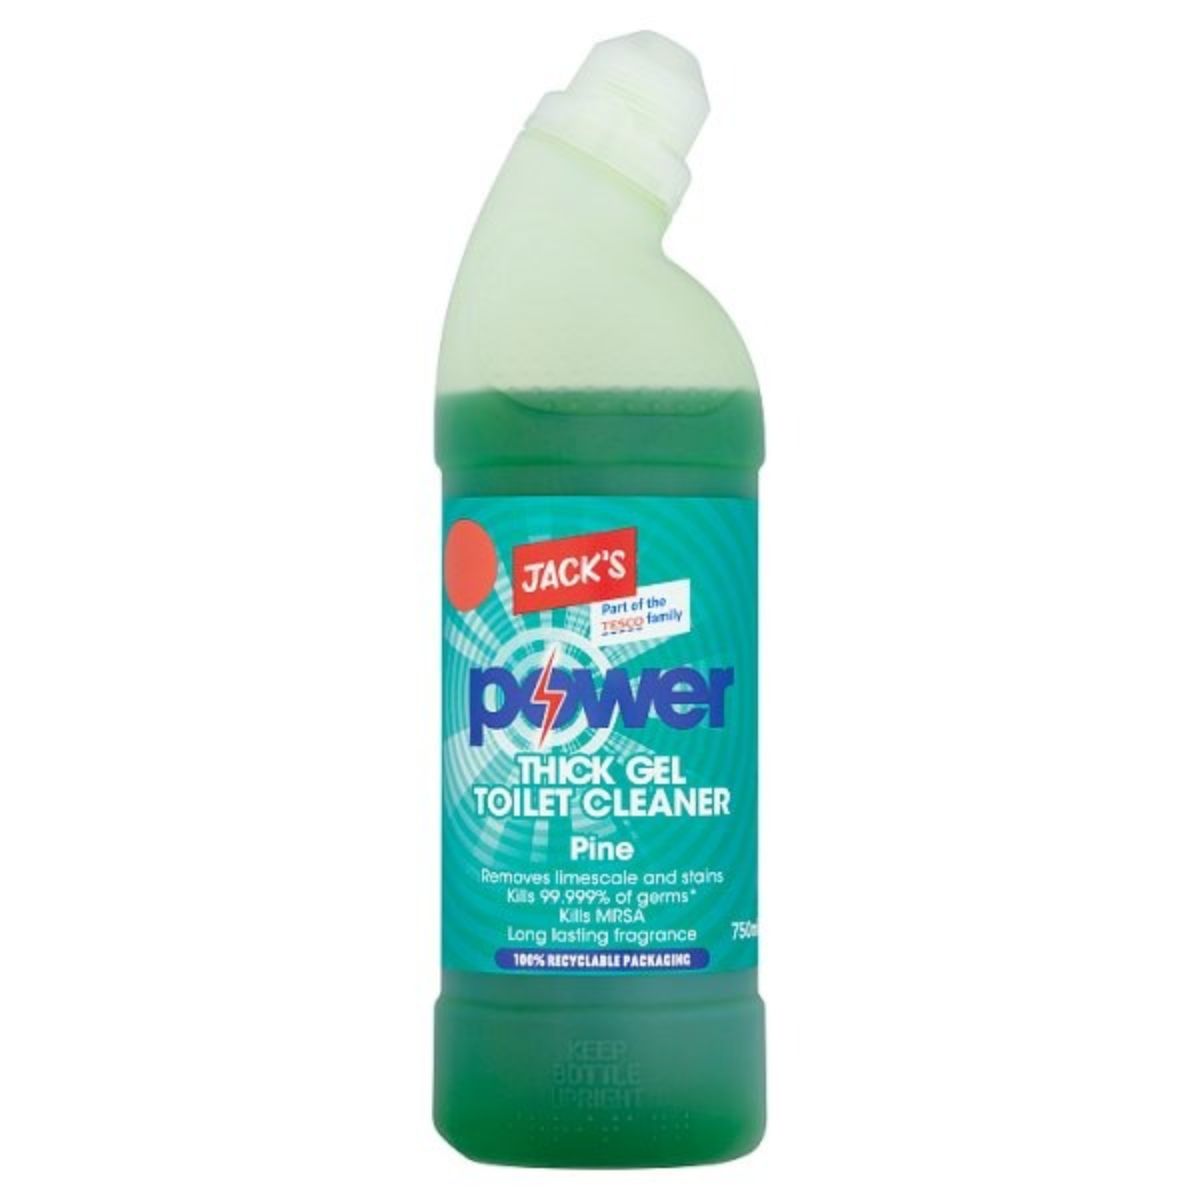 A bottle of Jacks - Power Thick Gel Toilet Cleaner Pine - 750ml with a green color.